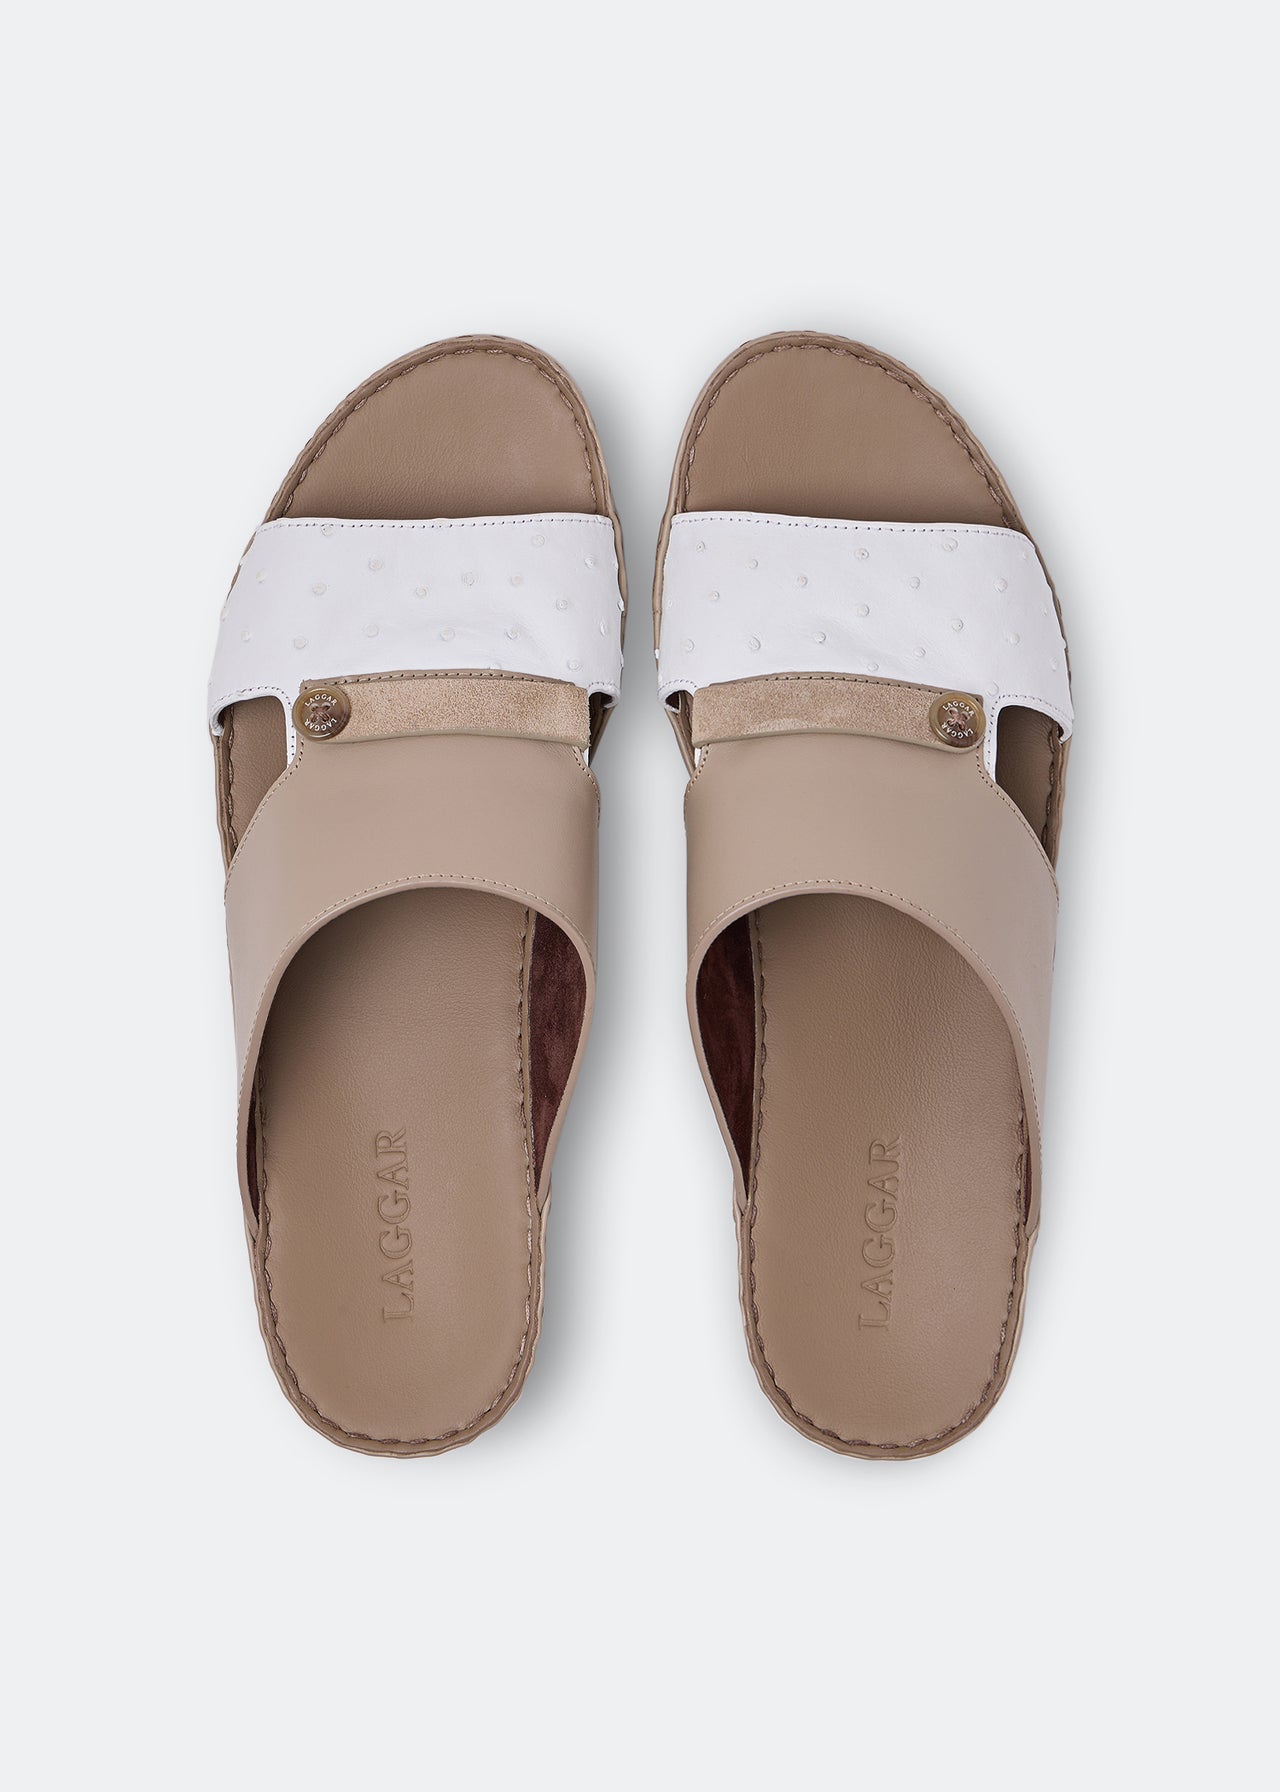 TIGHTENED STRAP SANDAL - TAUPE